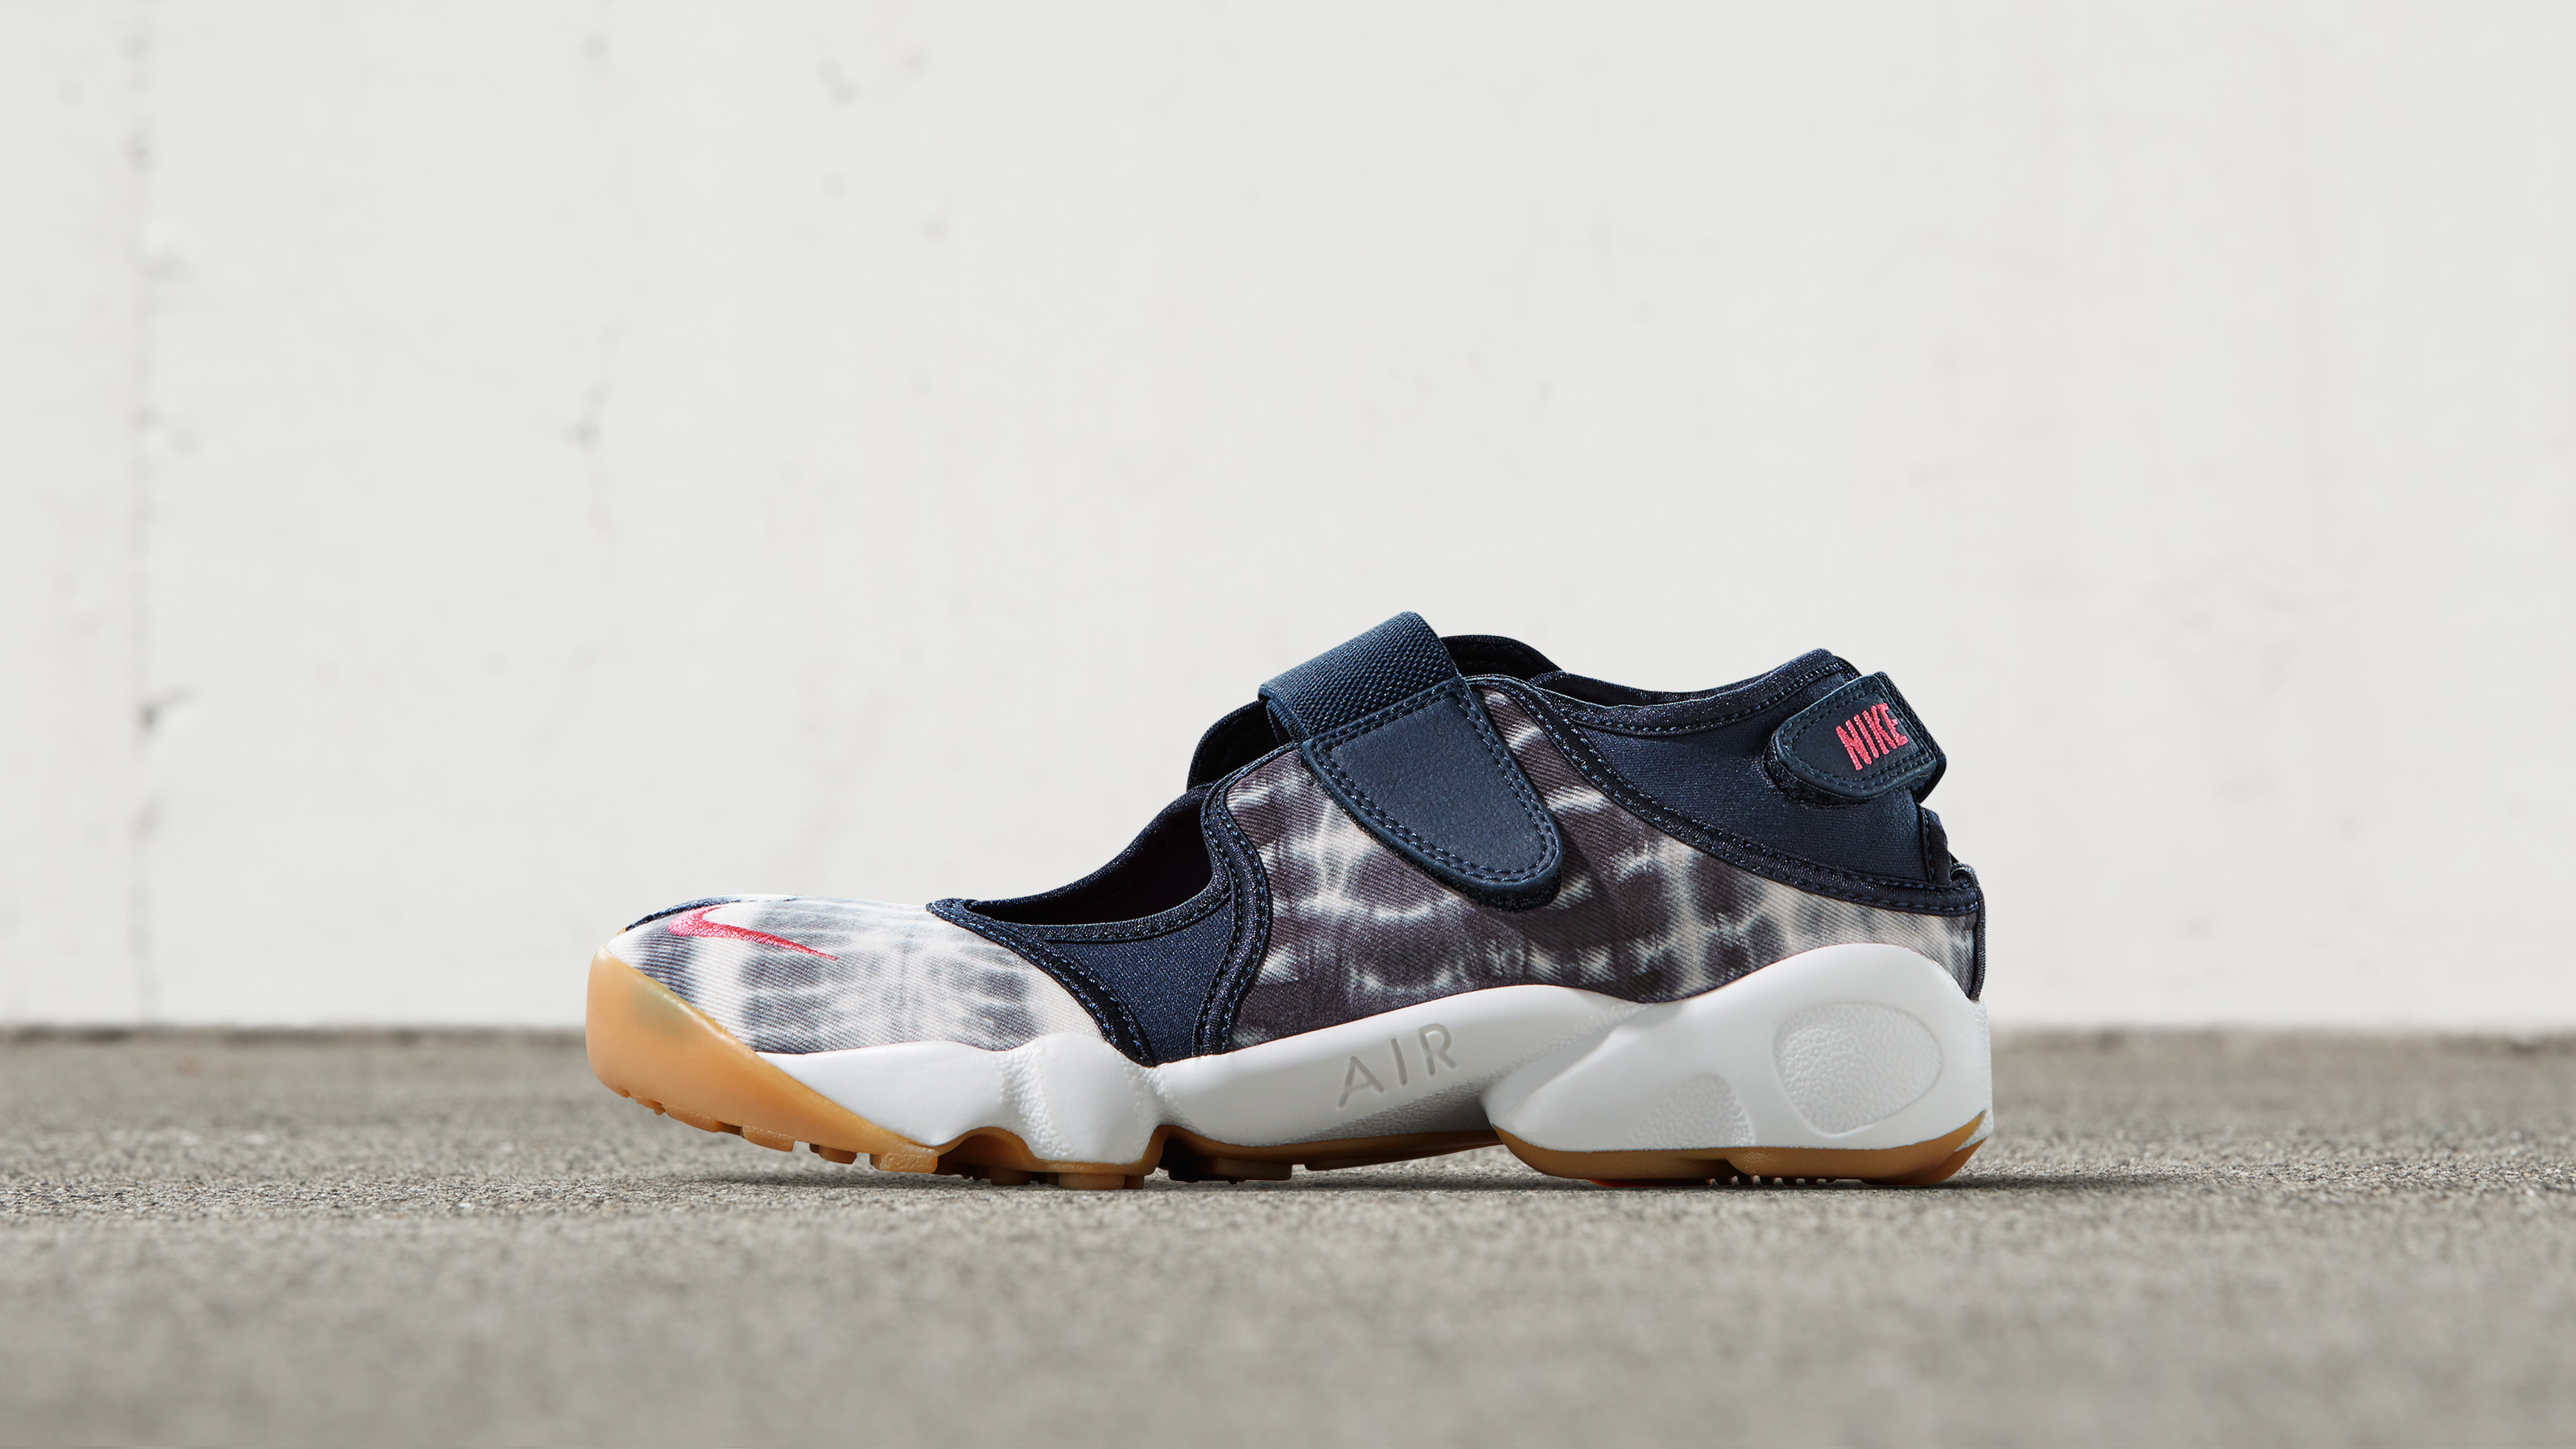 The WMNS Nike Air Rift Premium Lands in Two Colorways - WearTesters